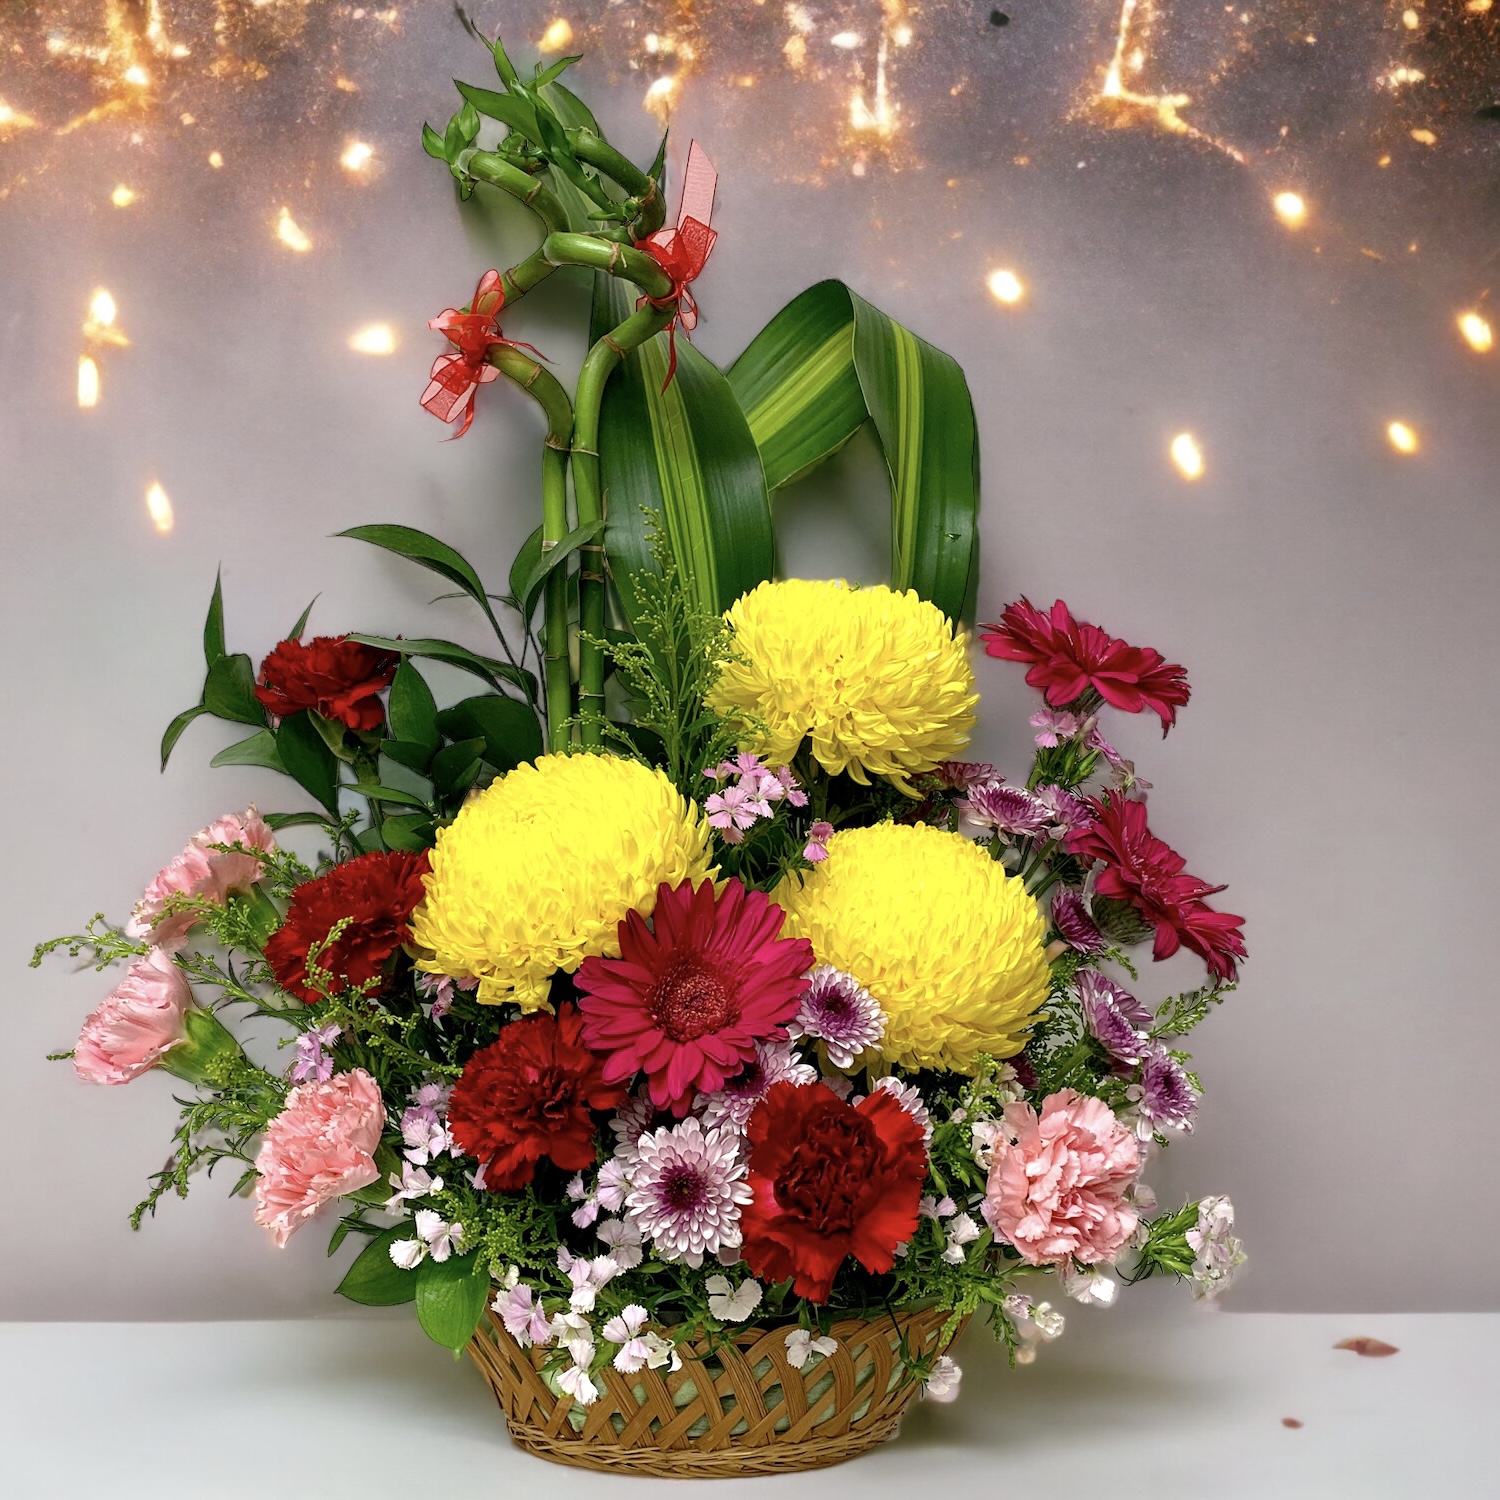 A Best Flowers Gift For CNY -CNYF3